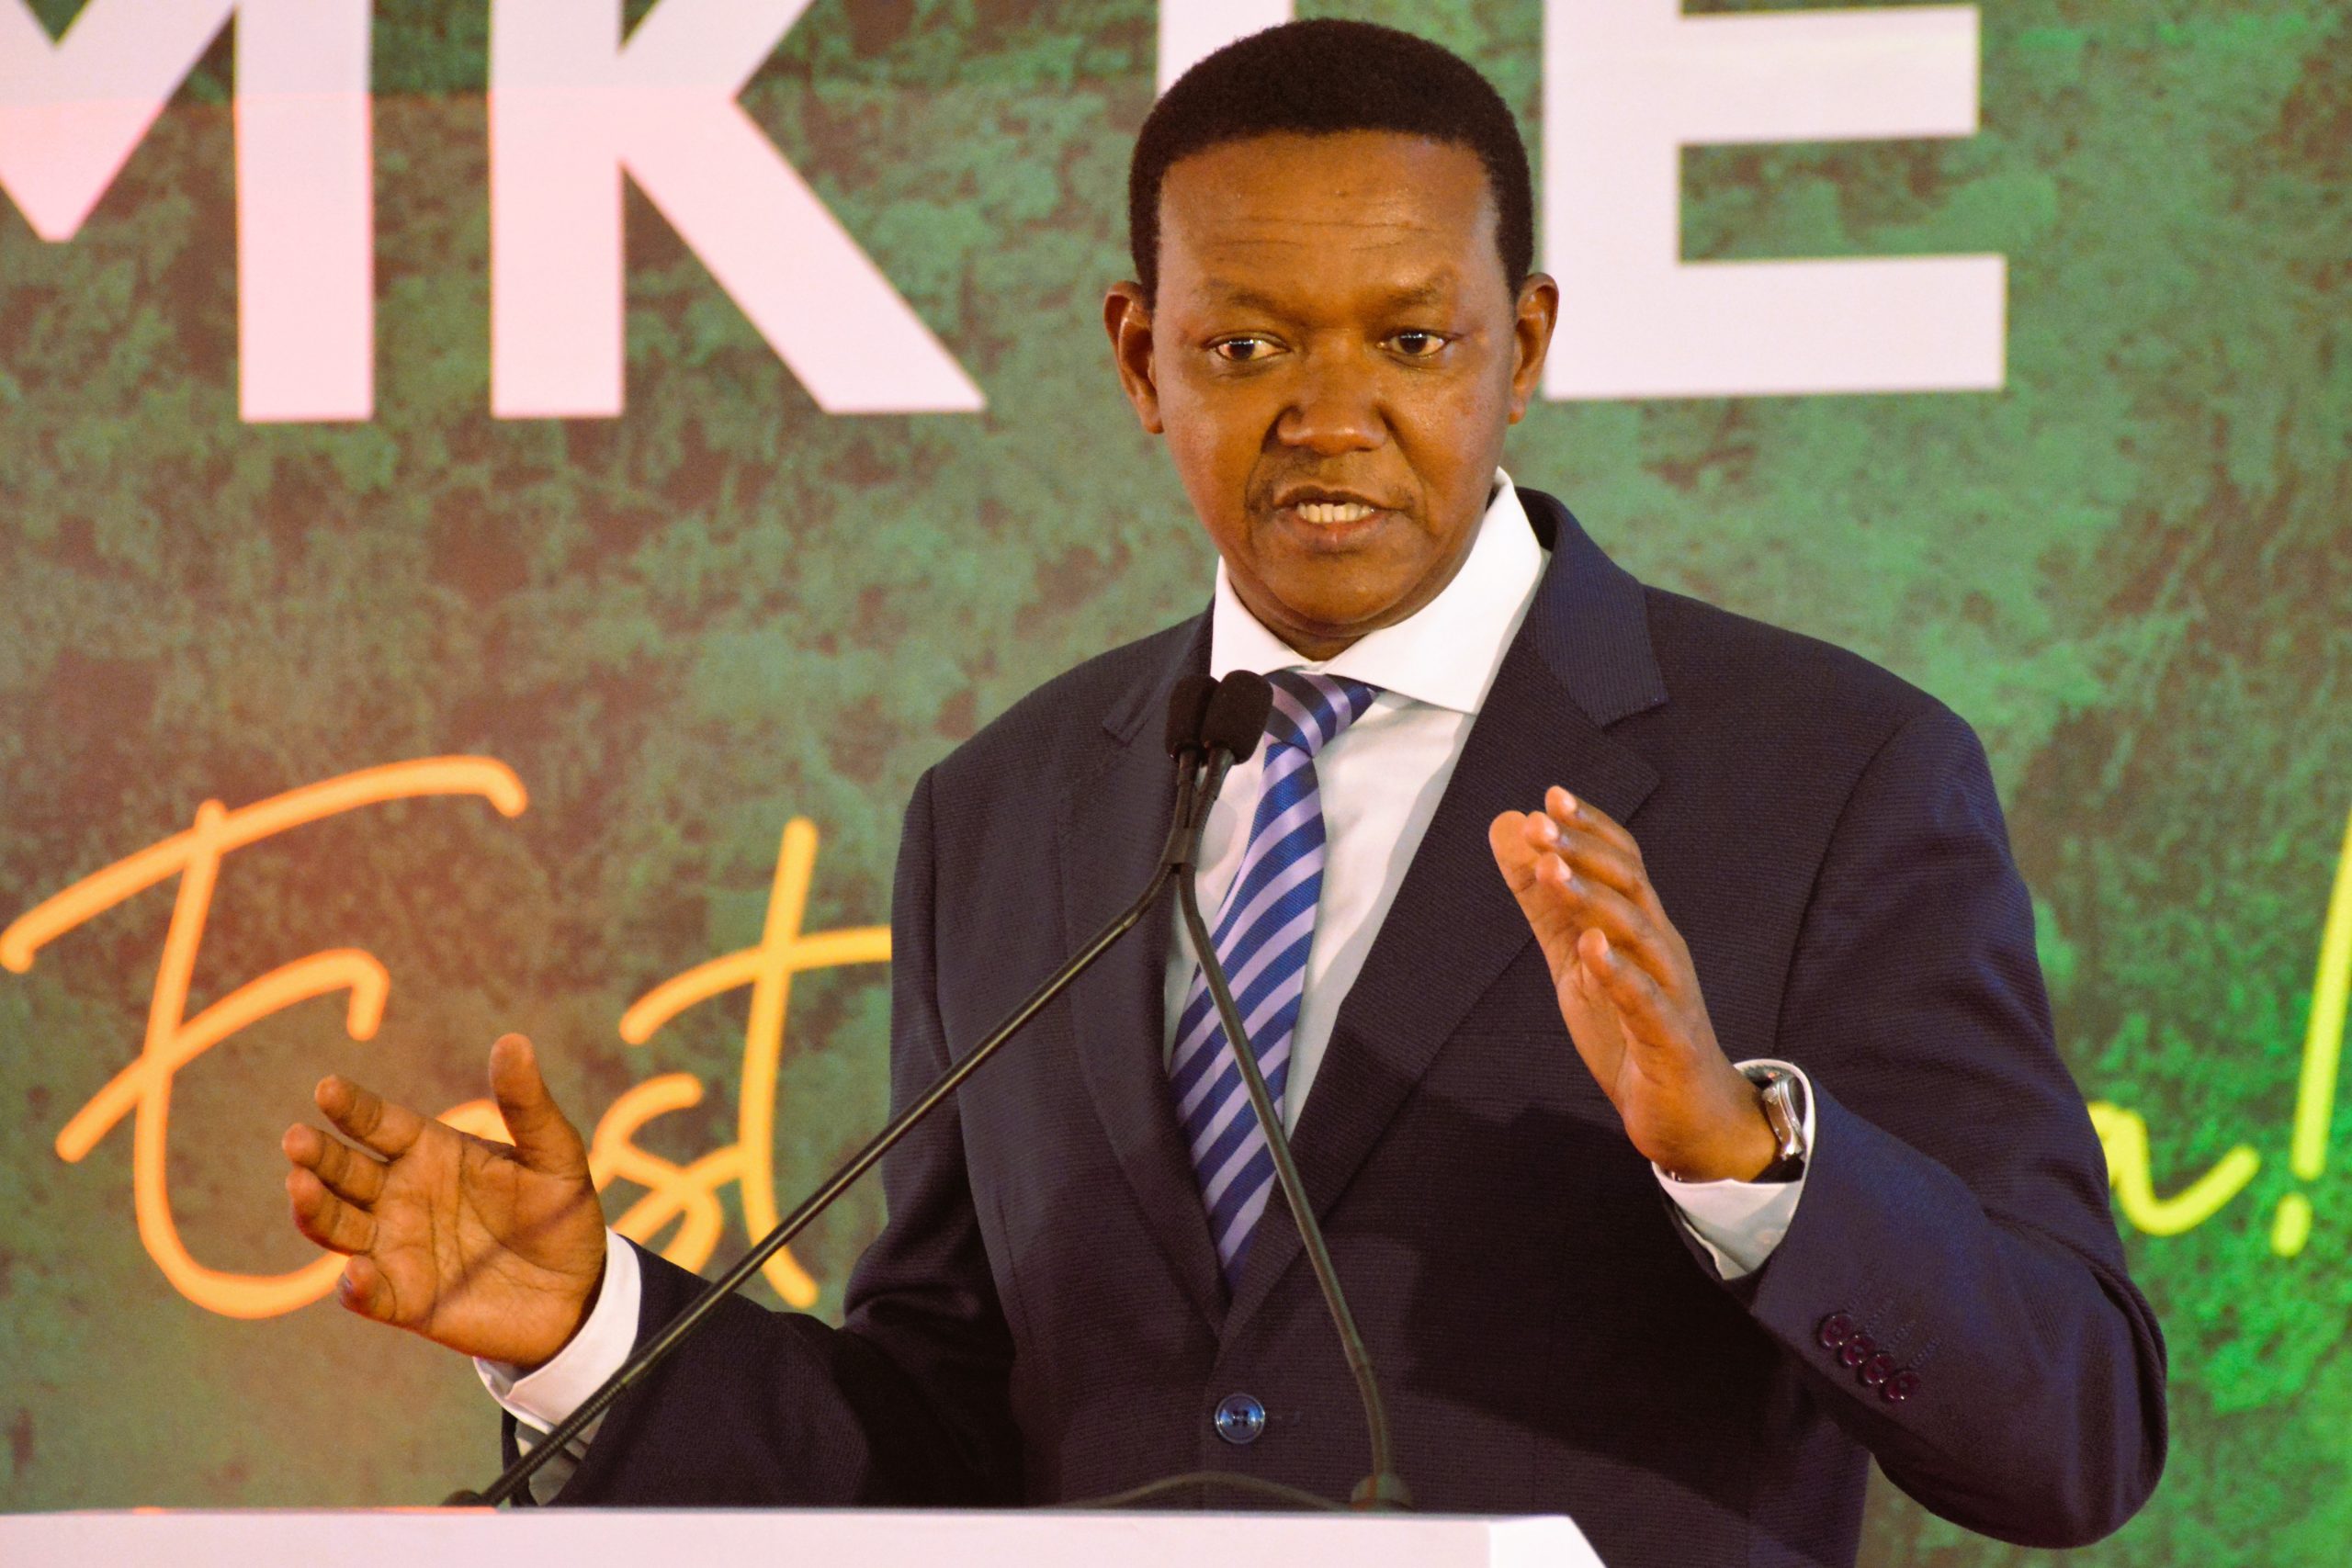 The Cabinet Secretary for Tourism and Wildlife-Kenya, Dr. Alfred Mutua, addressing delegates during the closing ceremony of the 3rd East African Regional Tourism Expo and the 12th Magical Kenya Travel Expo, today, at the Kenyatta International Convention Centre.